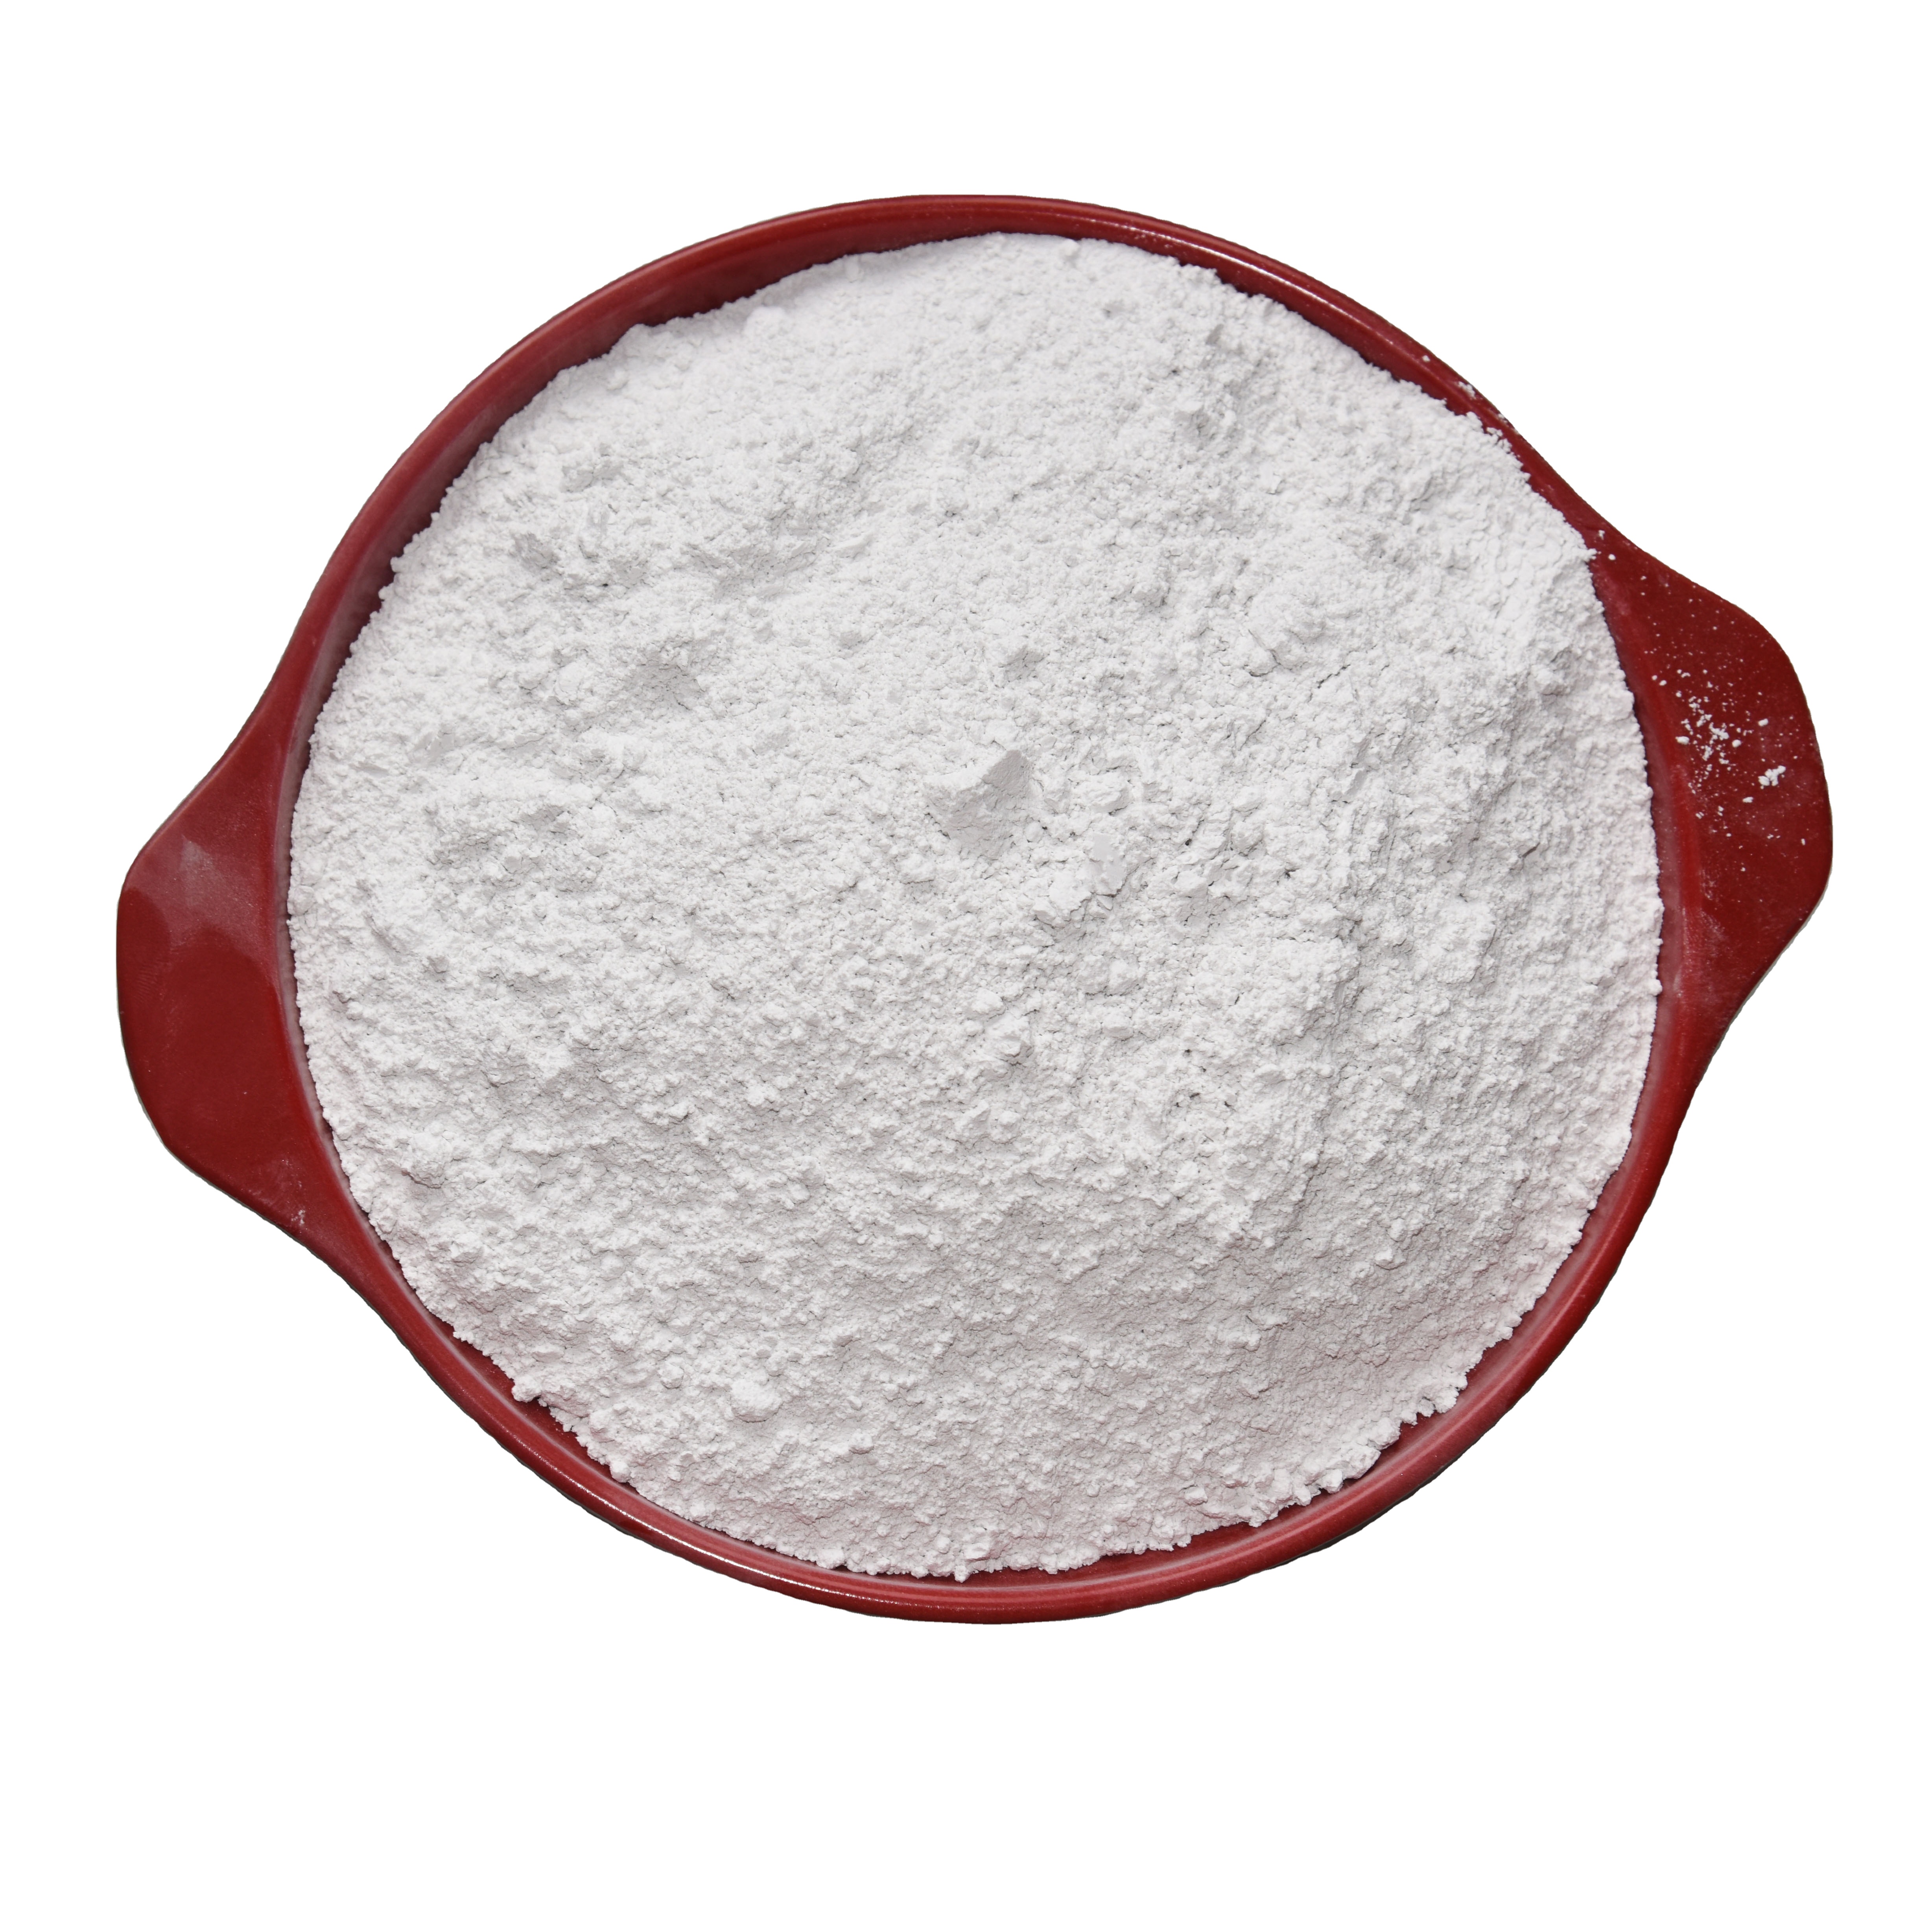 Calcium carbonate is used in paper making industry to reduce cost and increase whiteness